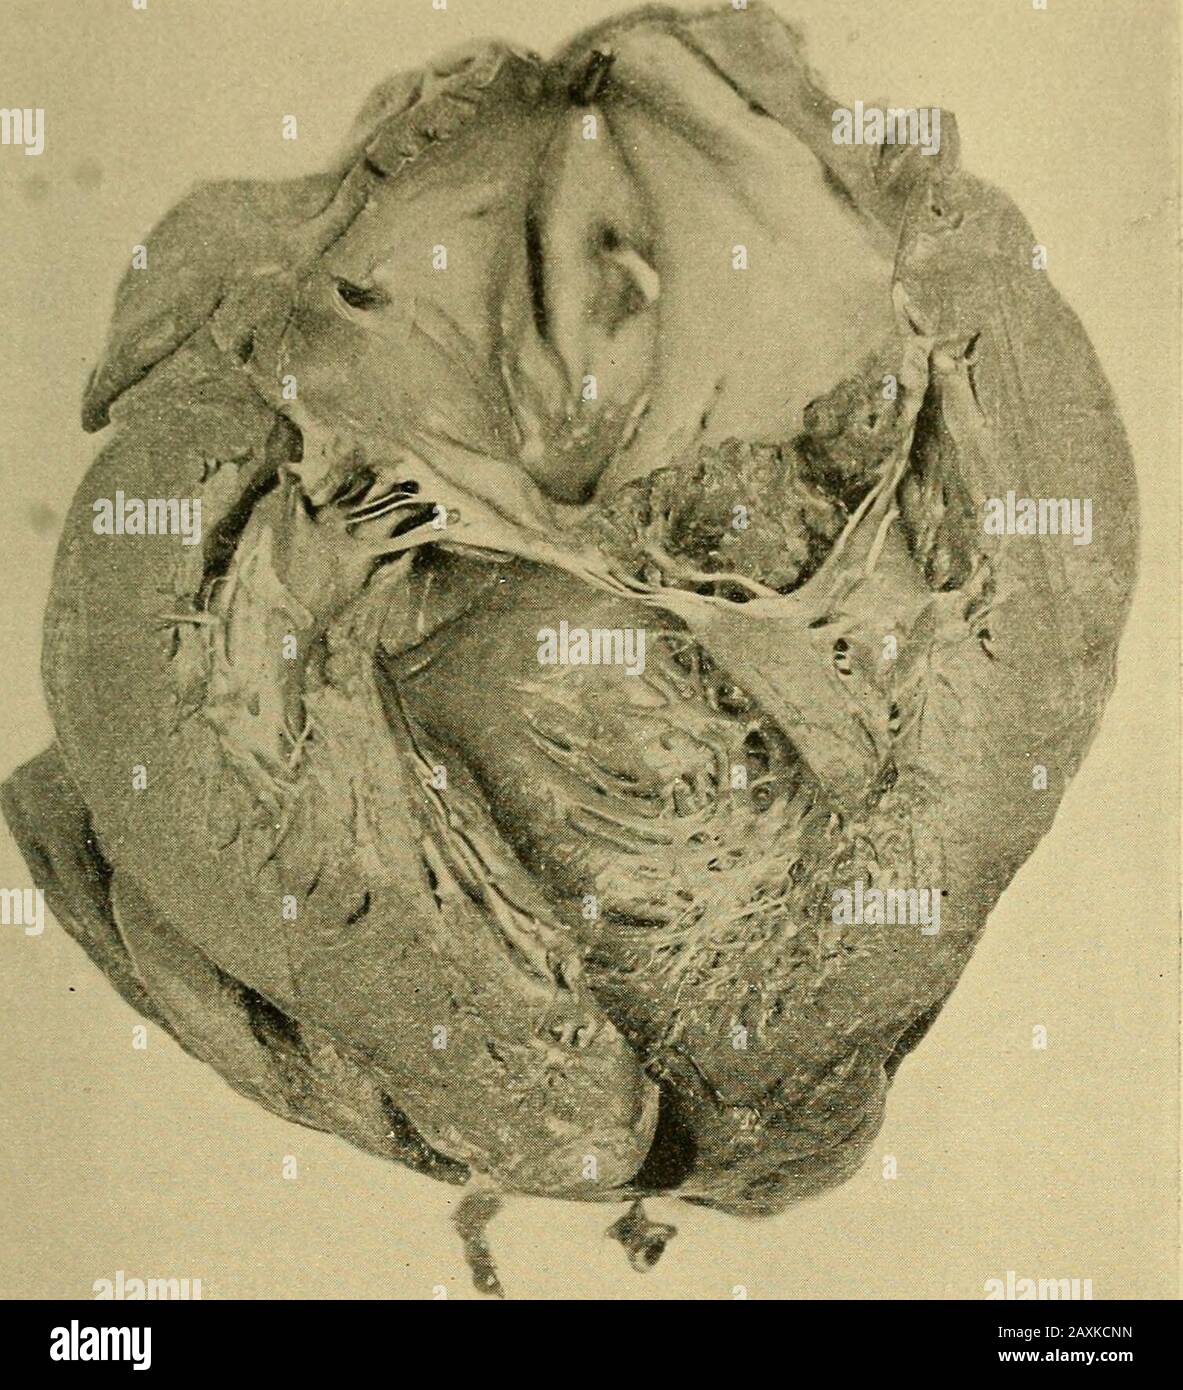 Diseases of the heart and arterial system : designed to be a practical presentation of the subject for the use of students and practitioners of medicine . if the eroded surface is notat once covered by the deposit of fibrin from the blood, a consid-erable loss of substance may take place. This is far more common,however, in the malignant form, although it has been observed insimple endocarditis complicating rheumatism. More commonlythe eroded surface, necrotic from the action of bacteria, is at oncecovered by a deposit of fibrin from the blood. This fibrin forms afirm warty mass of a yellowish Stock Photo